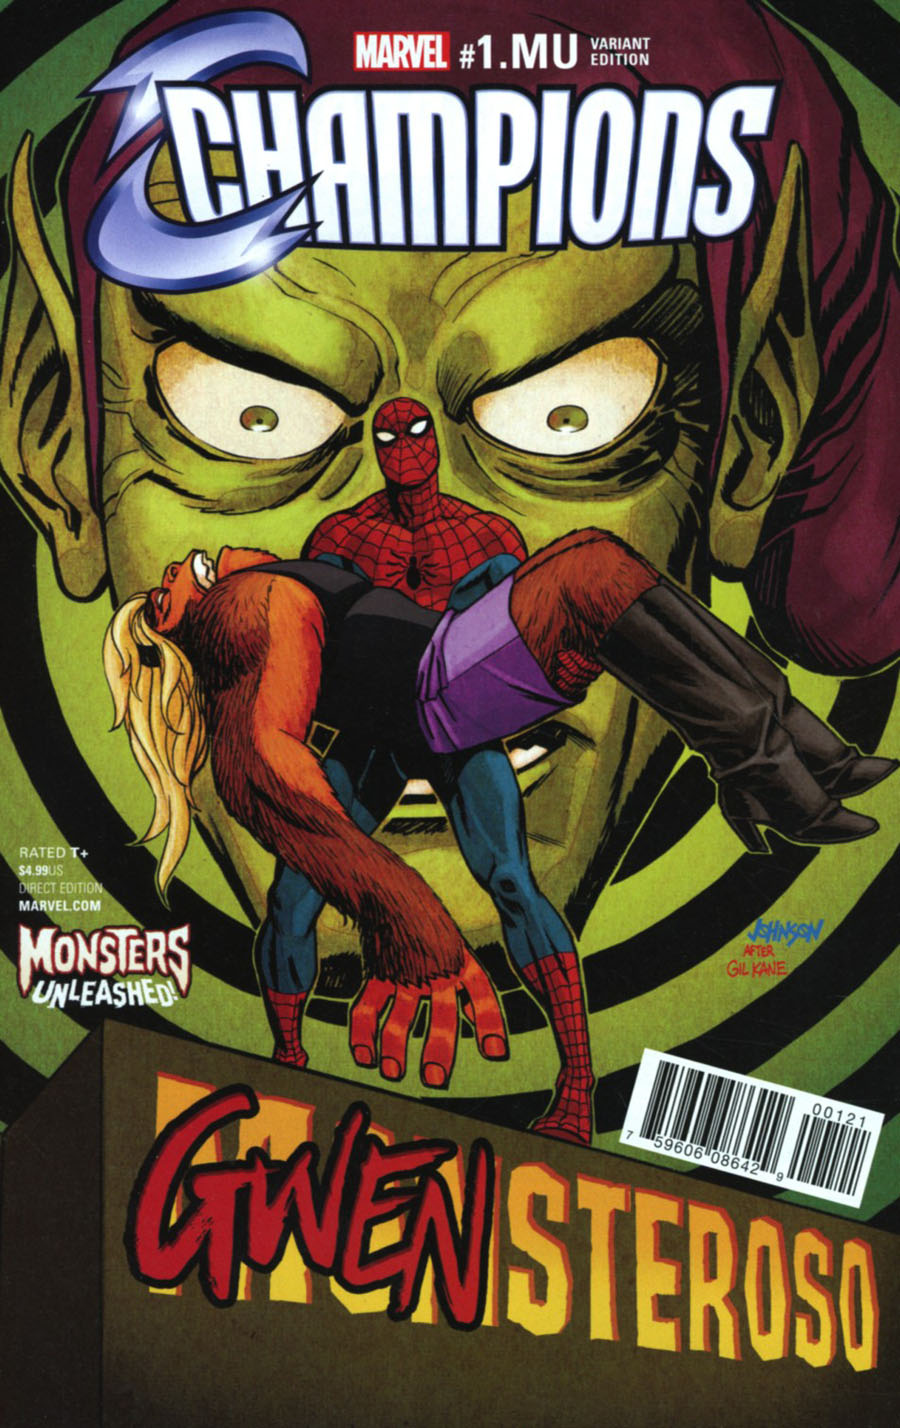 Champions (Marvel) Vol 2 #1.MU Cover B Variant Dave Johnson Gwenster Unleashed Cover (Monsters Unleashed Tie-In)